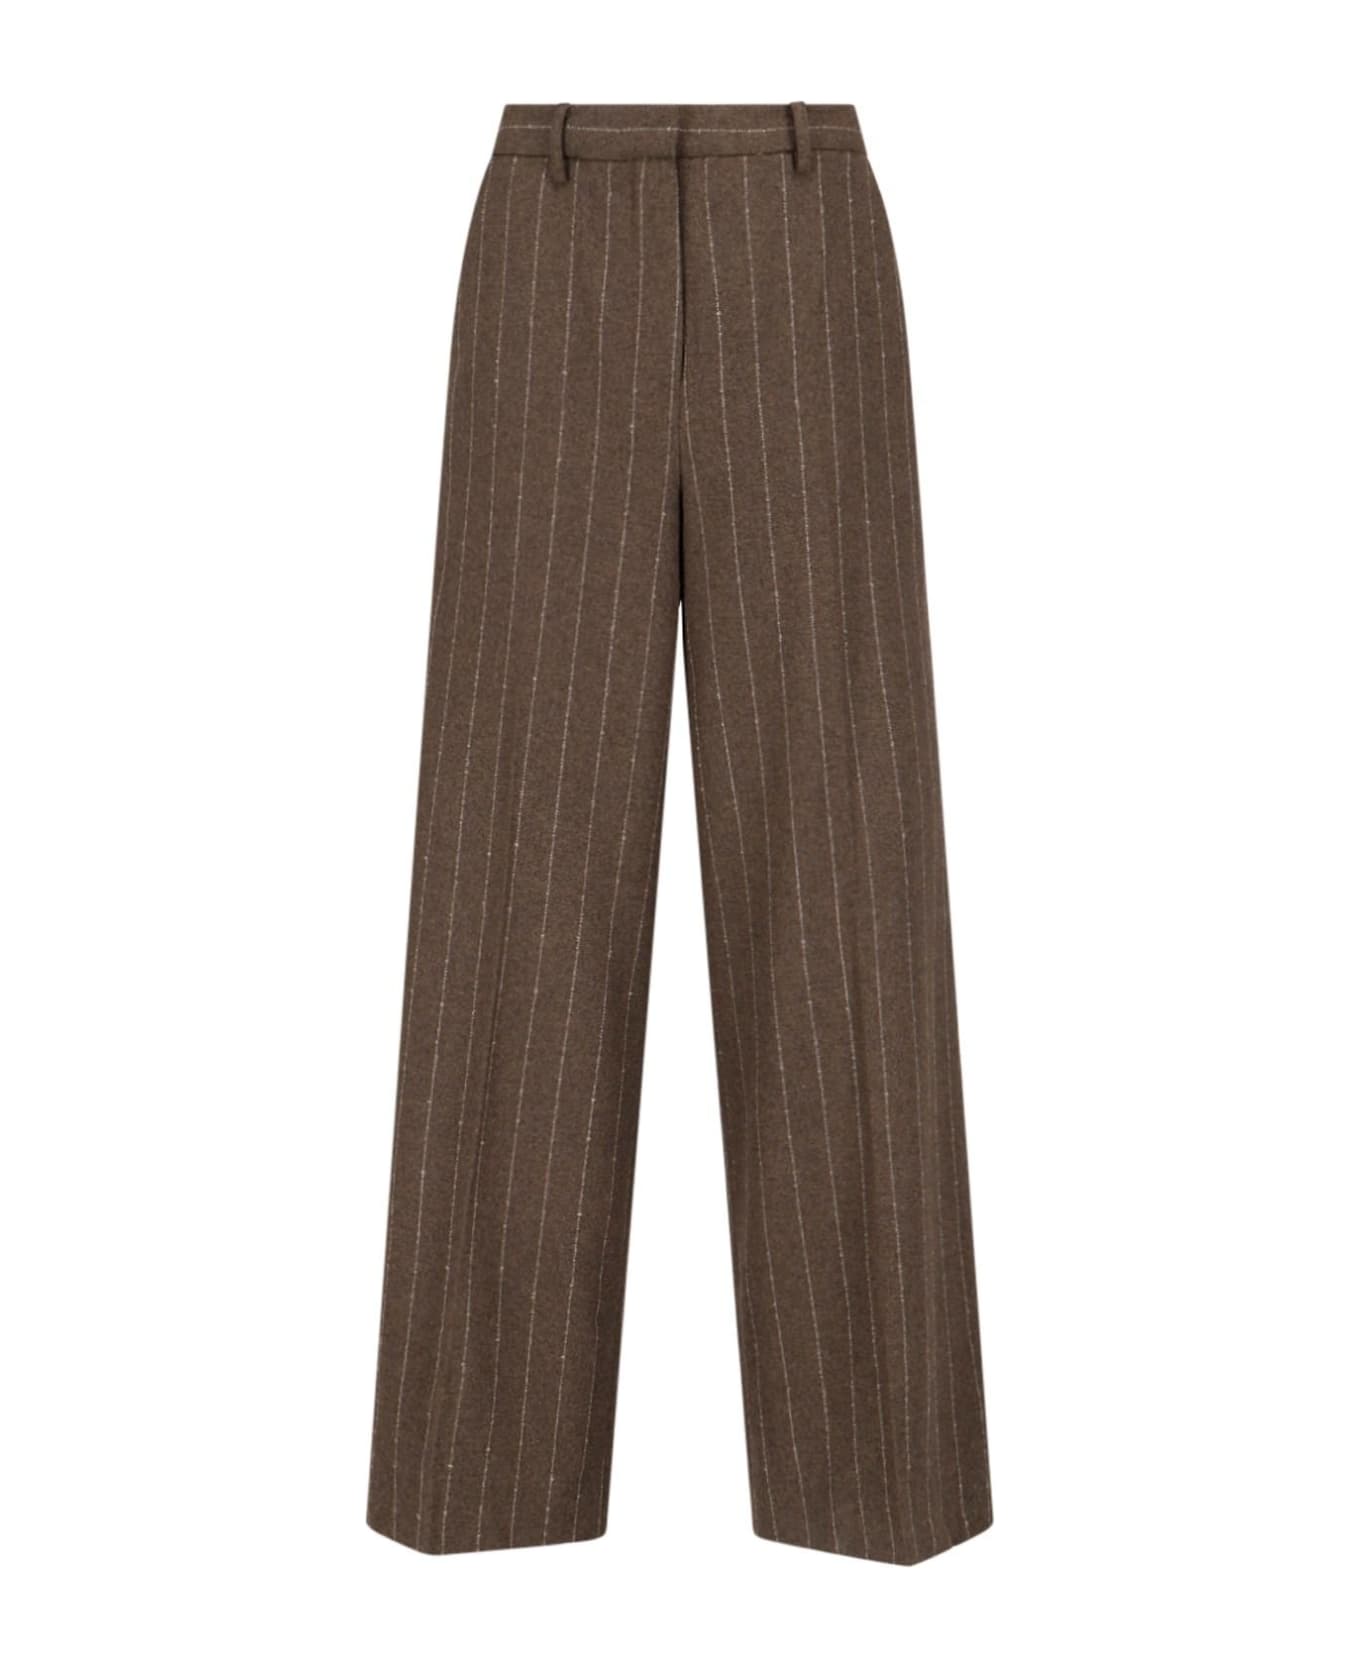 REMAIN Birger Christensen Stitched Tailored Pants - Brown ボトムス